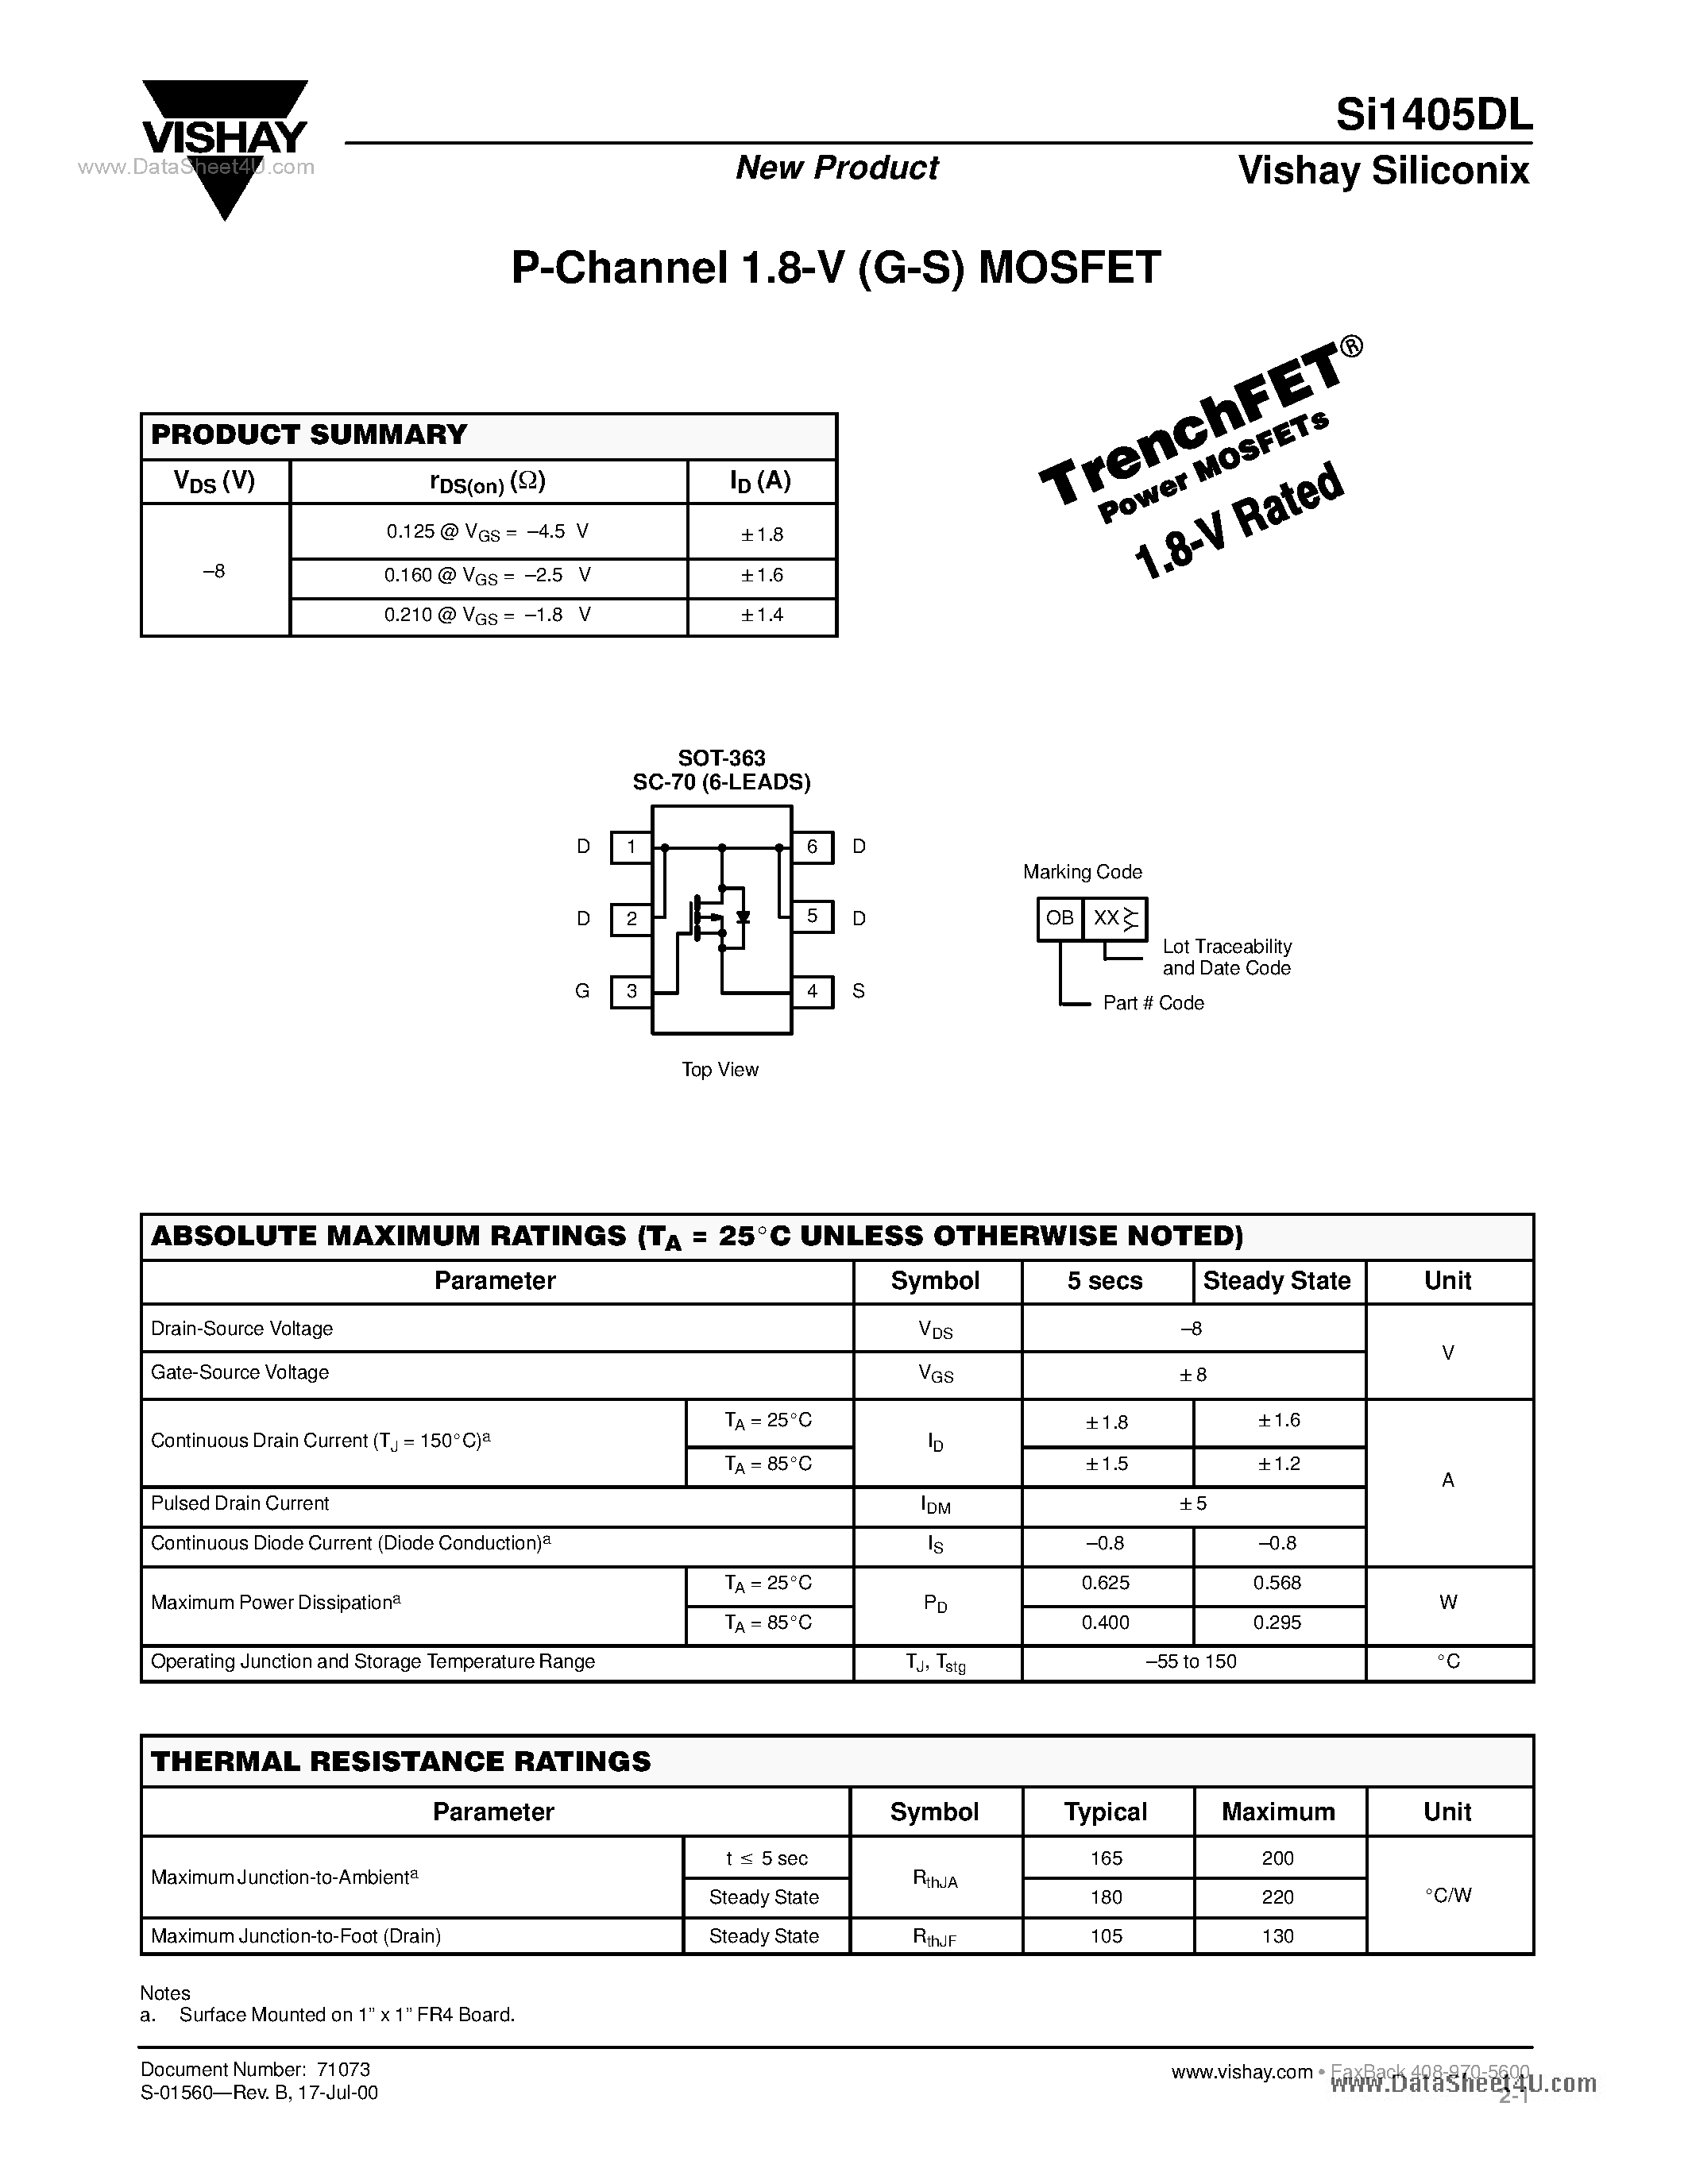 Даташит SI1405DL - P-Channel 1.8-V (G-S) MOSFET страница 1